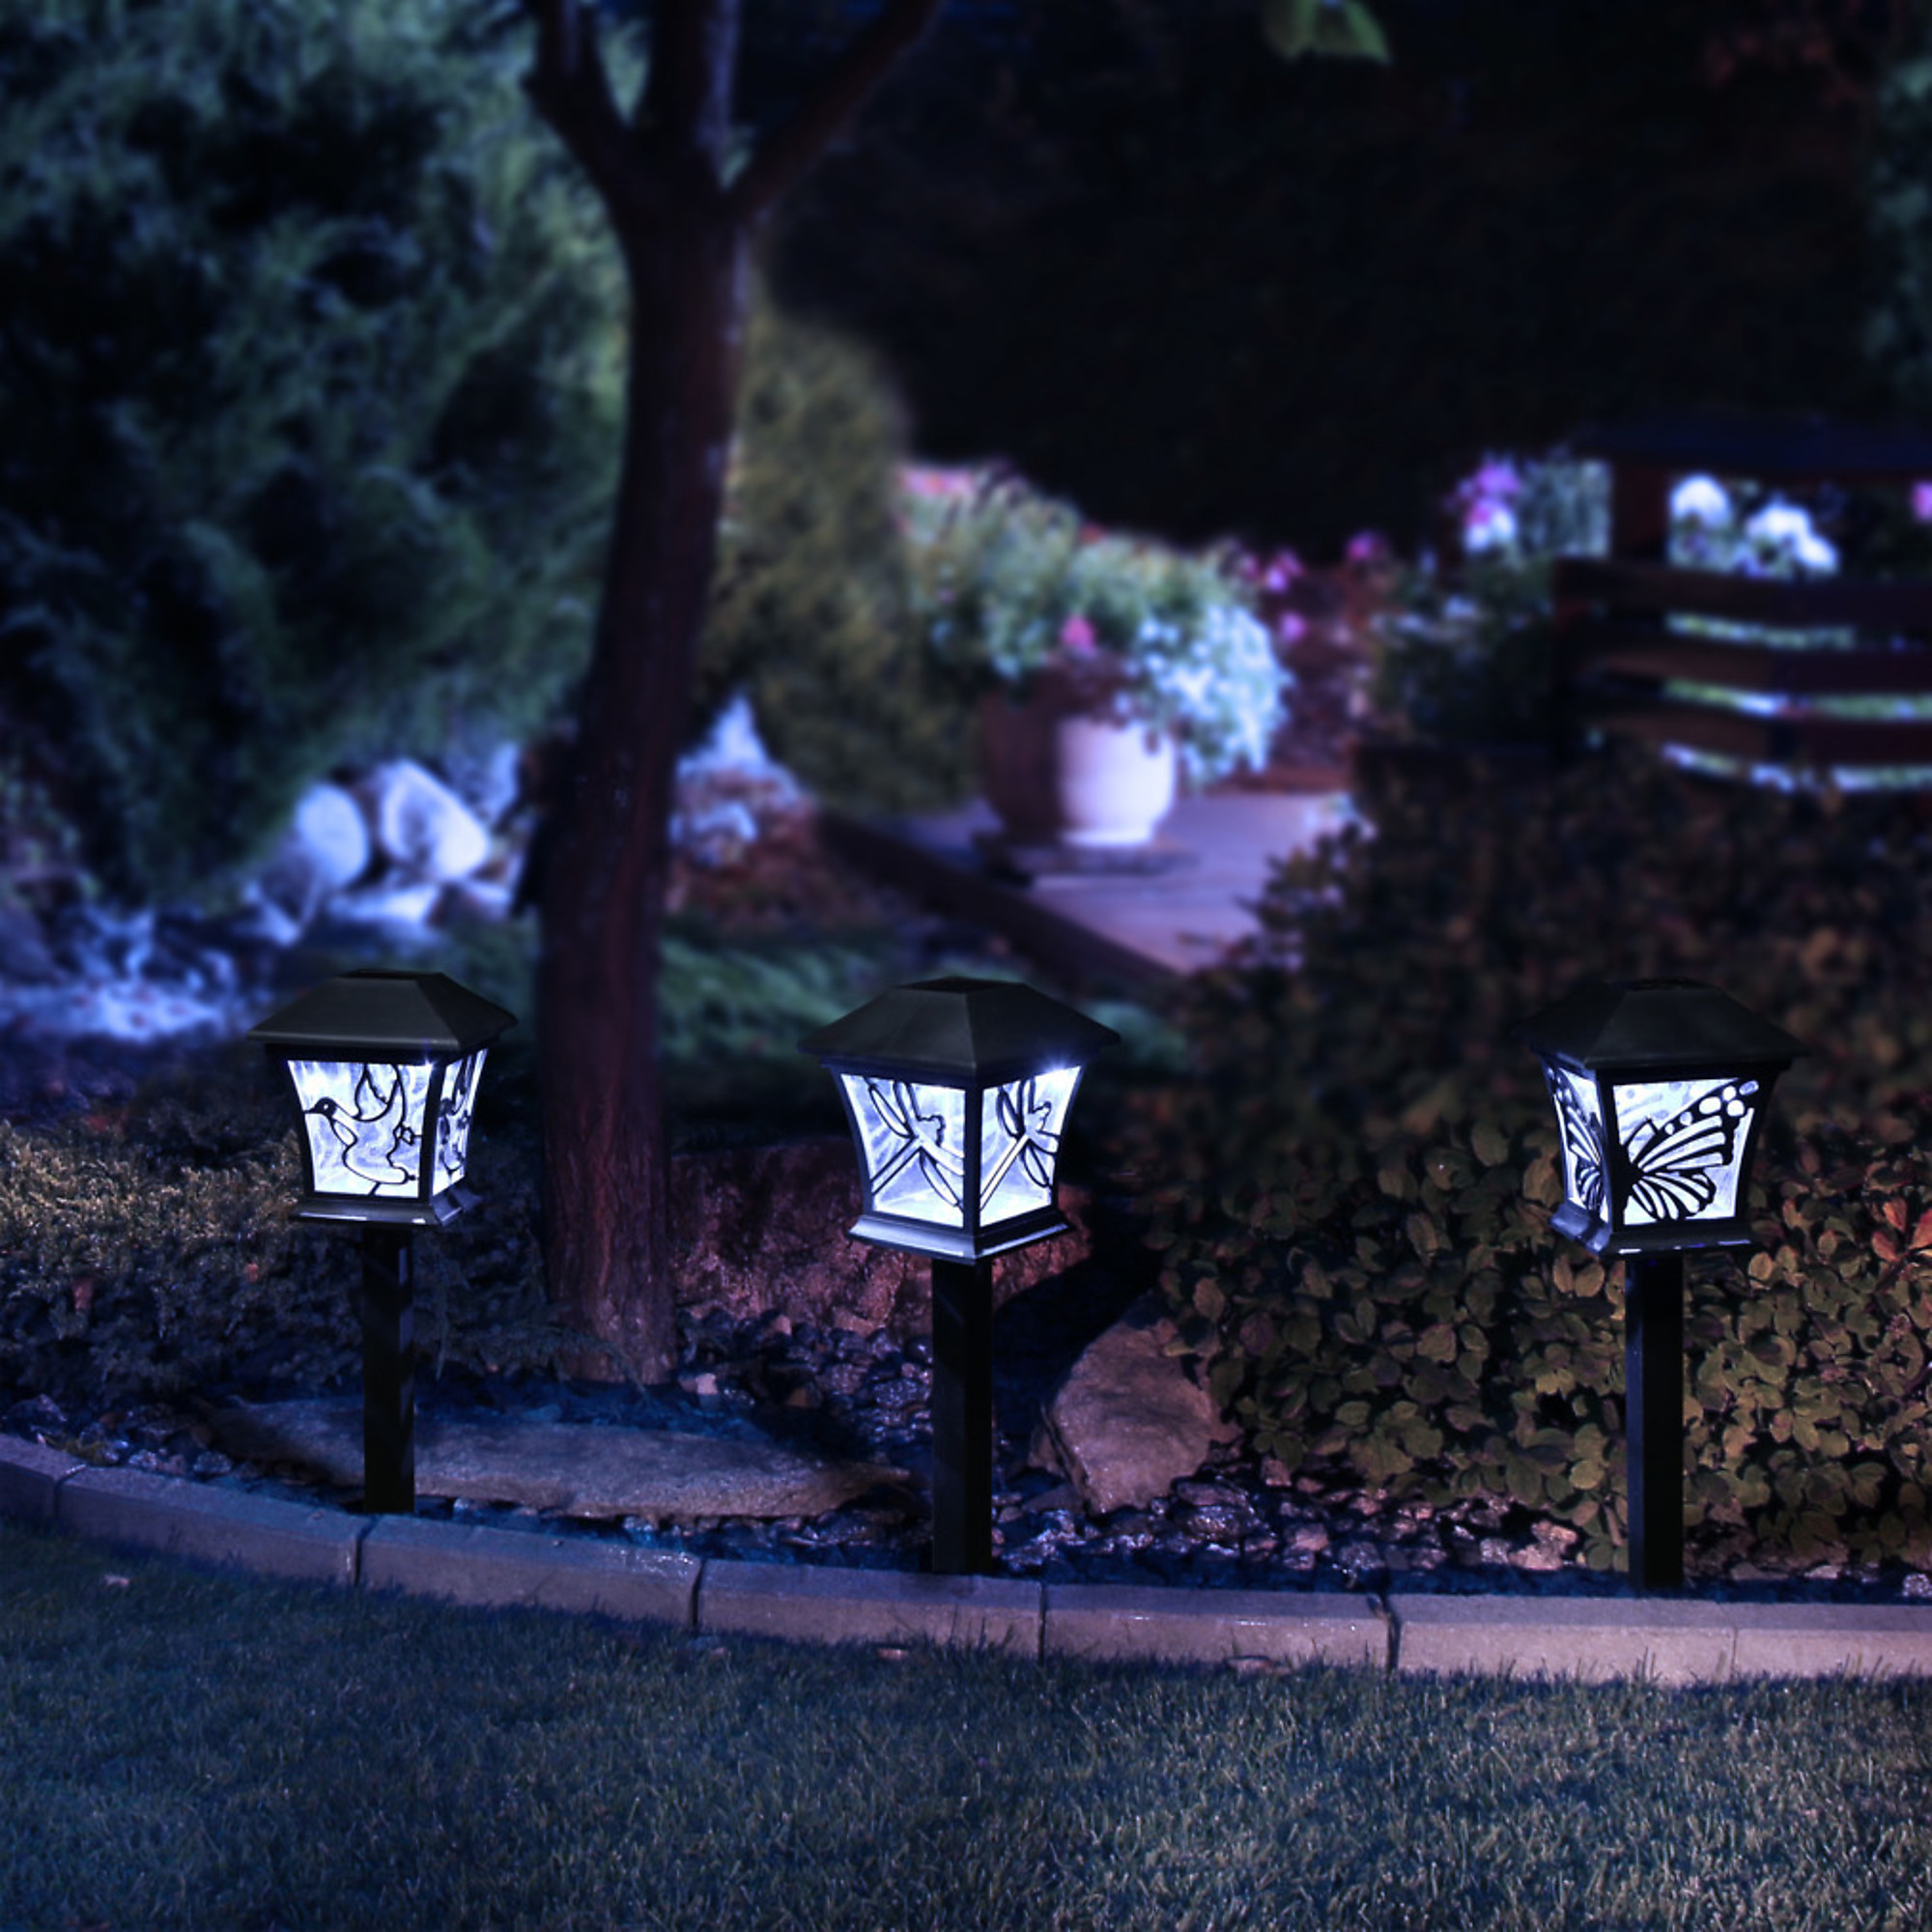 Alpine Corporation, Solar Black Lantern Pathway LED Light - Set of 3 Color White, Watts 0 Included (qty.) 3 Model QWE154A-SLR-3